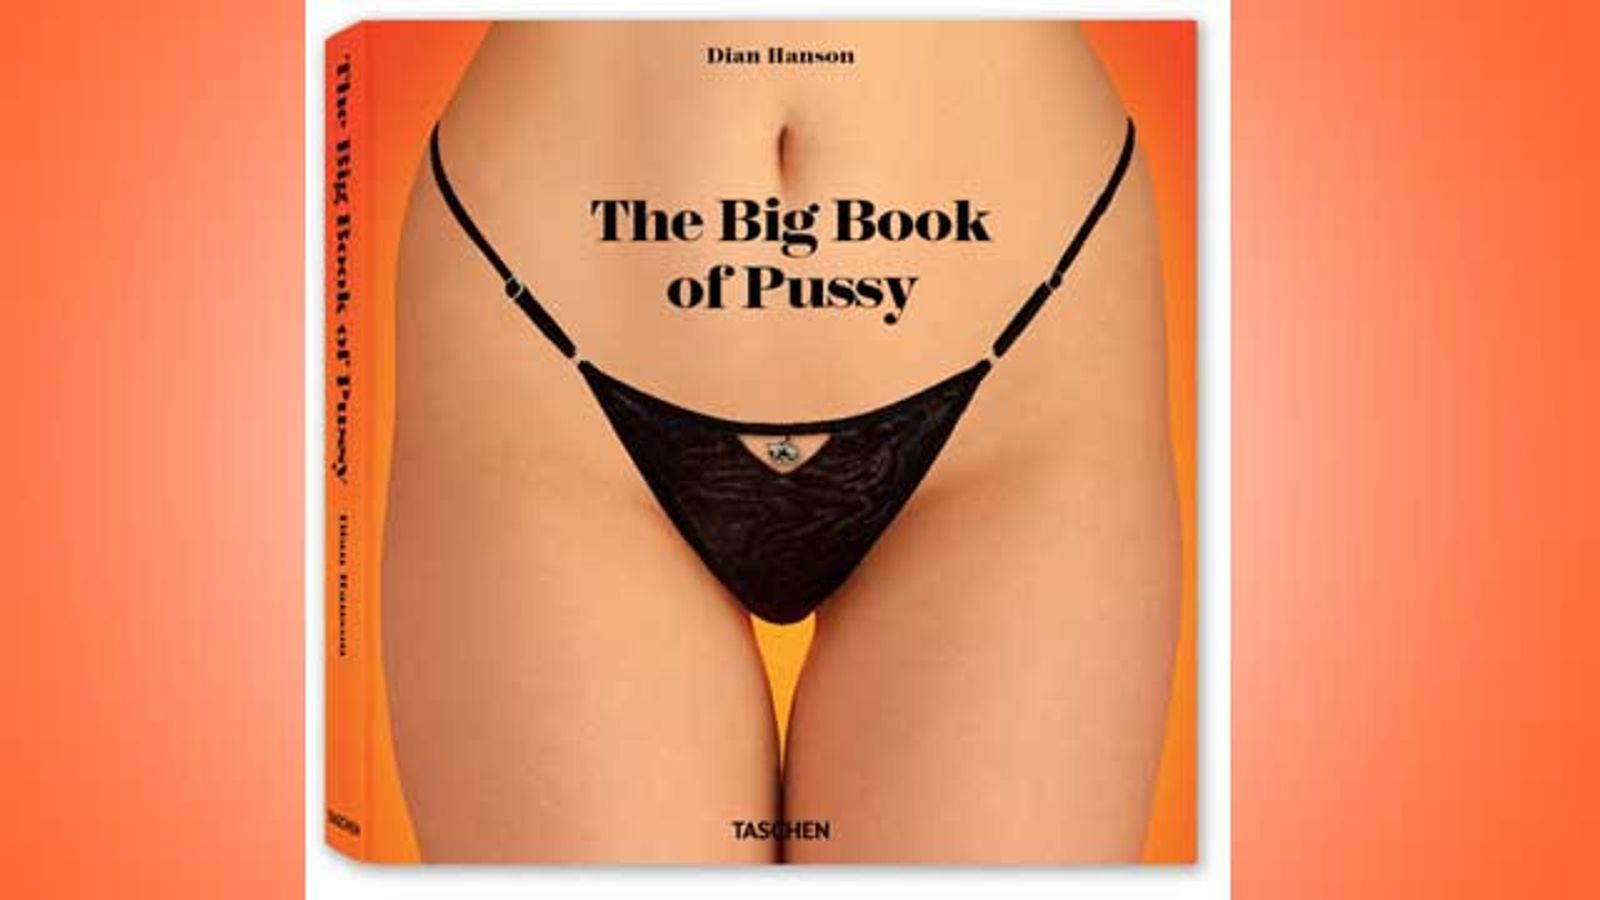 'The Big Book of Pussy': A Review